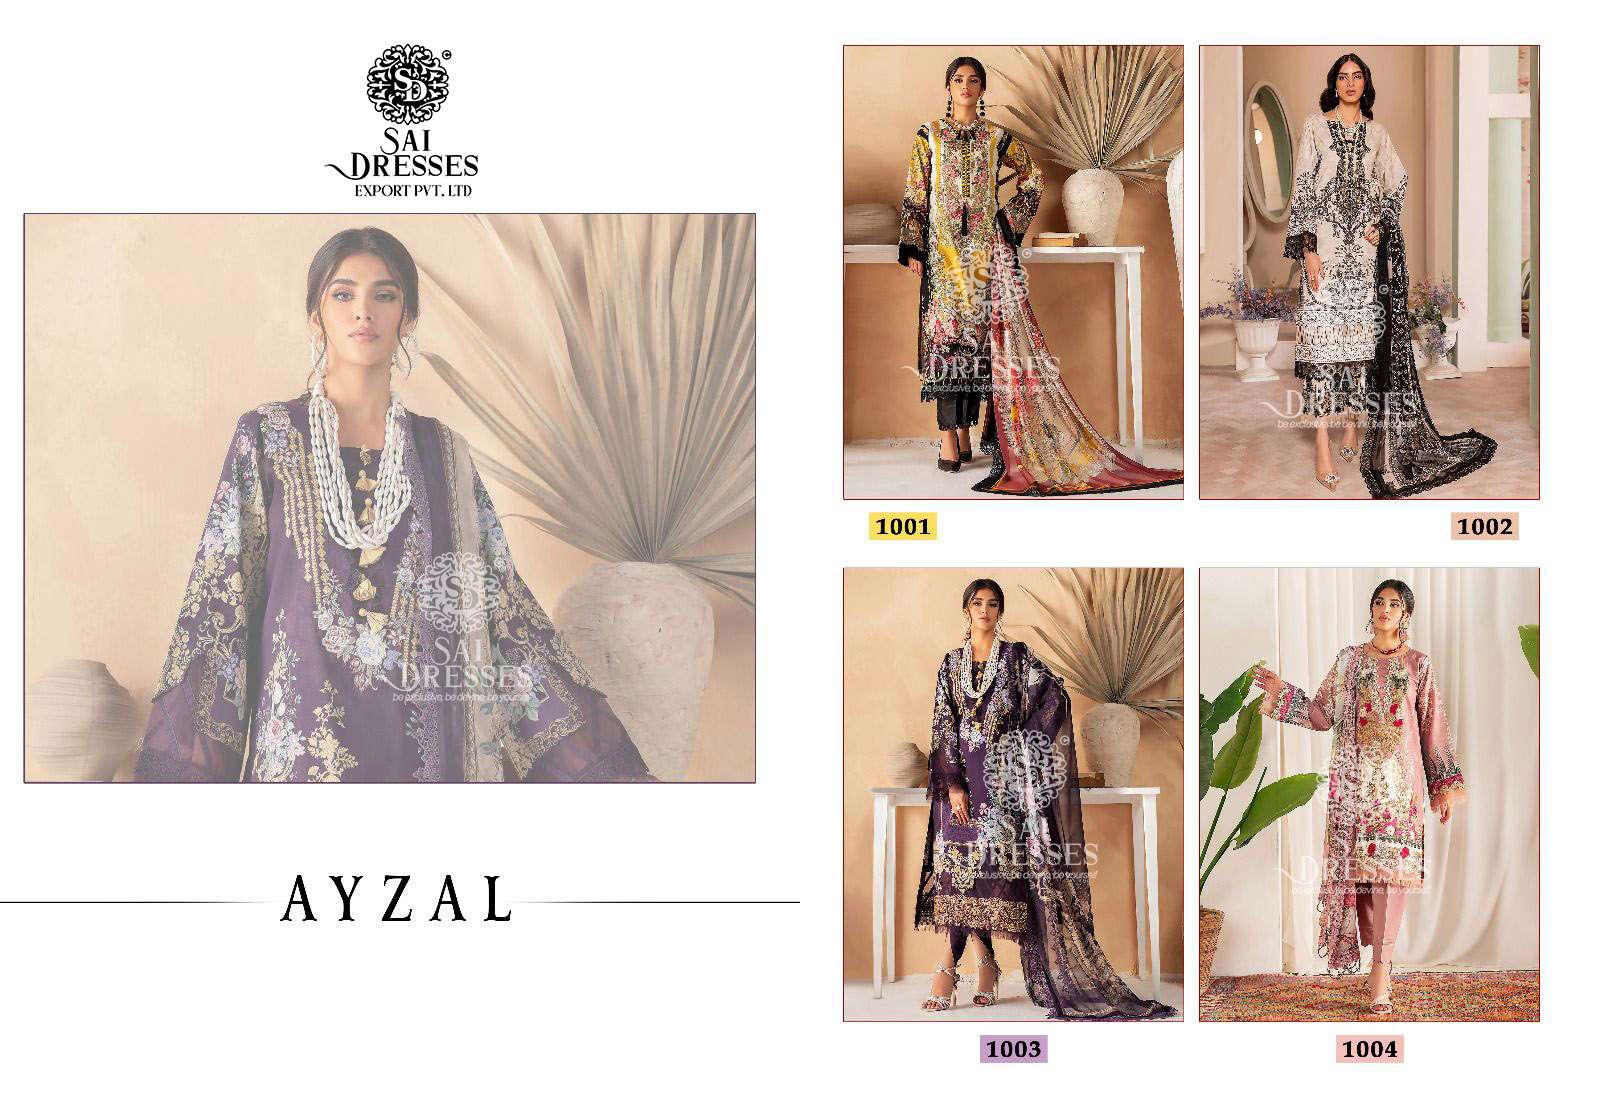 SAI DRESSES PRESENT AYZAL PURE COTTON WITH EXCLUSIVE PATCH EMBROIDERED PAKISTANI SALWAR SUITS IN WHOLESALE RATE IN SURAT